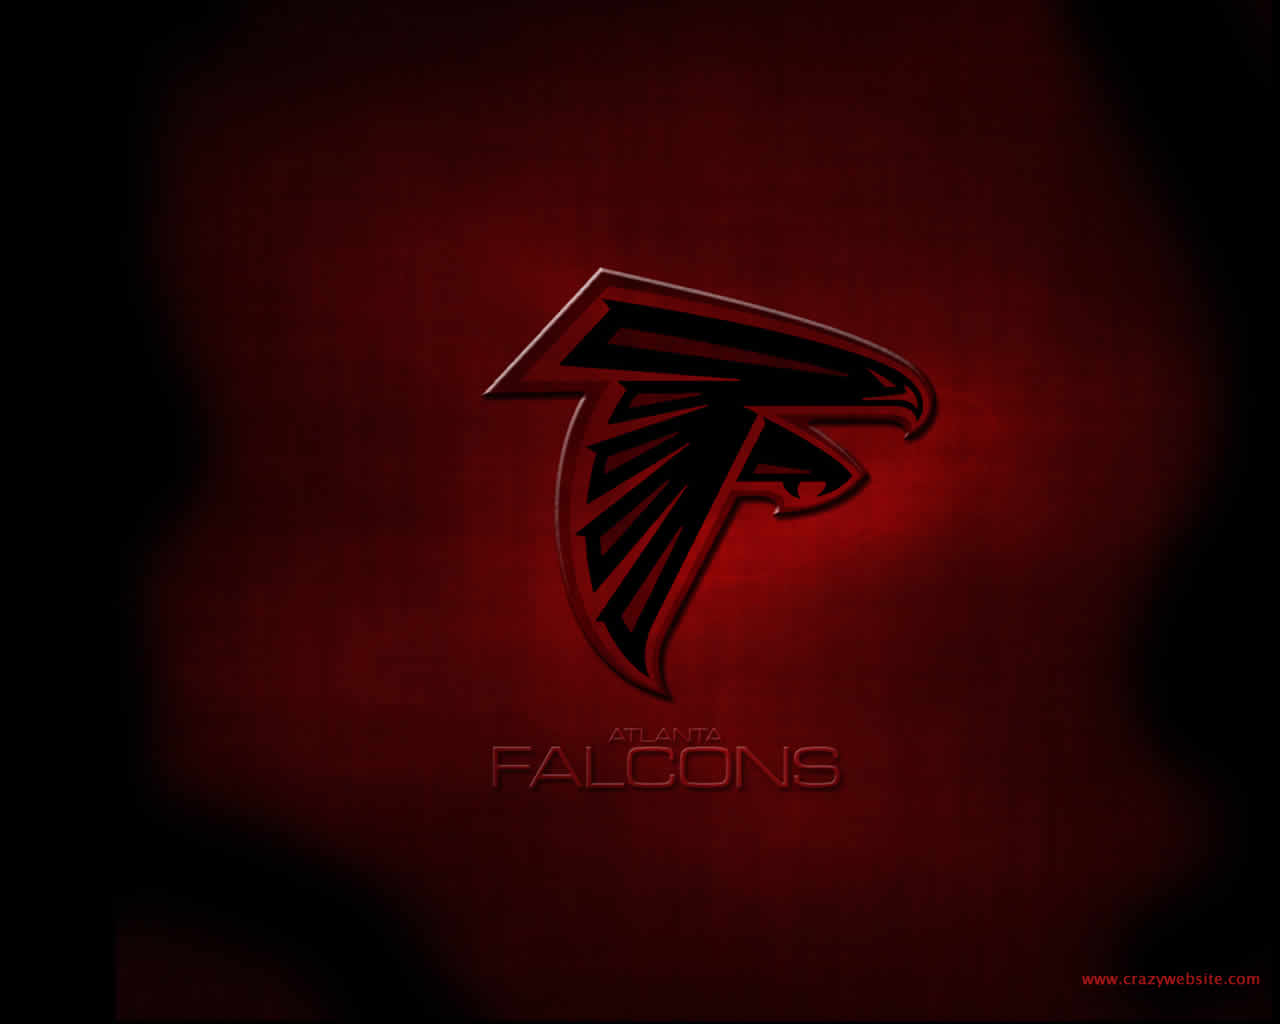 Your Favorite Nfc South Division Nfl Football Team The Atlanta Falcons